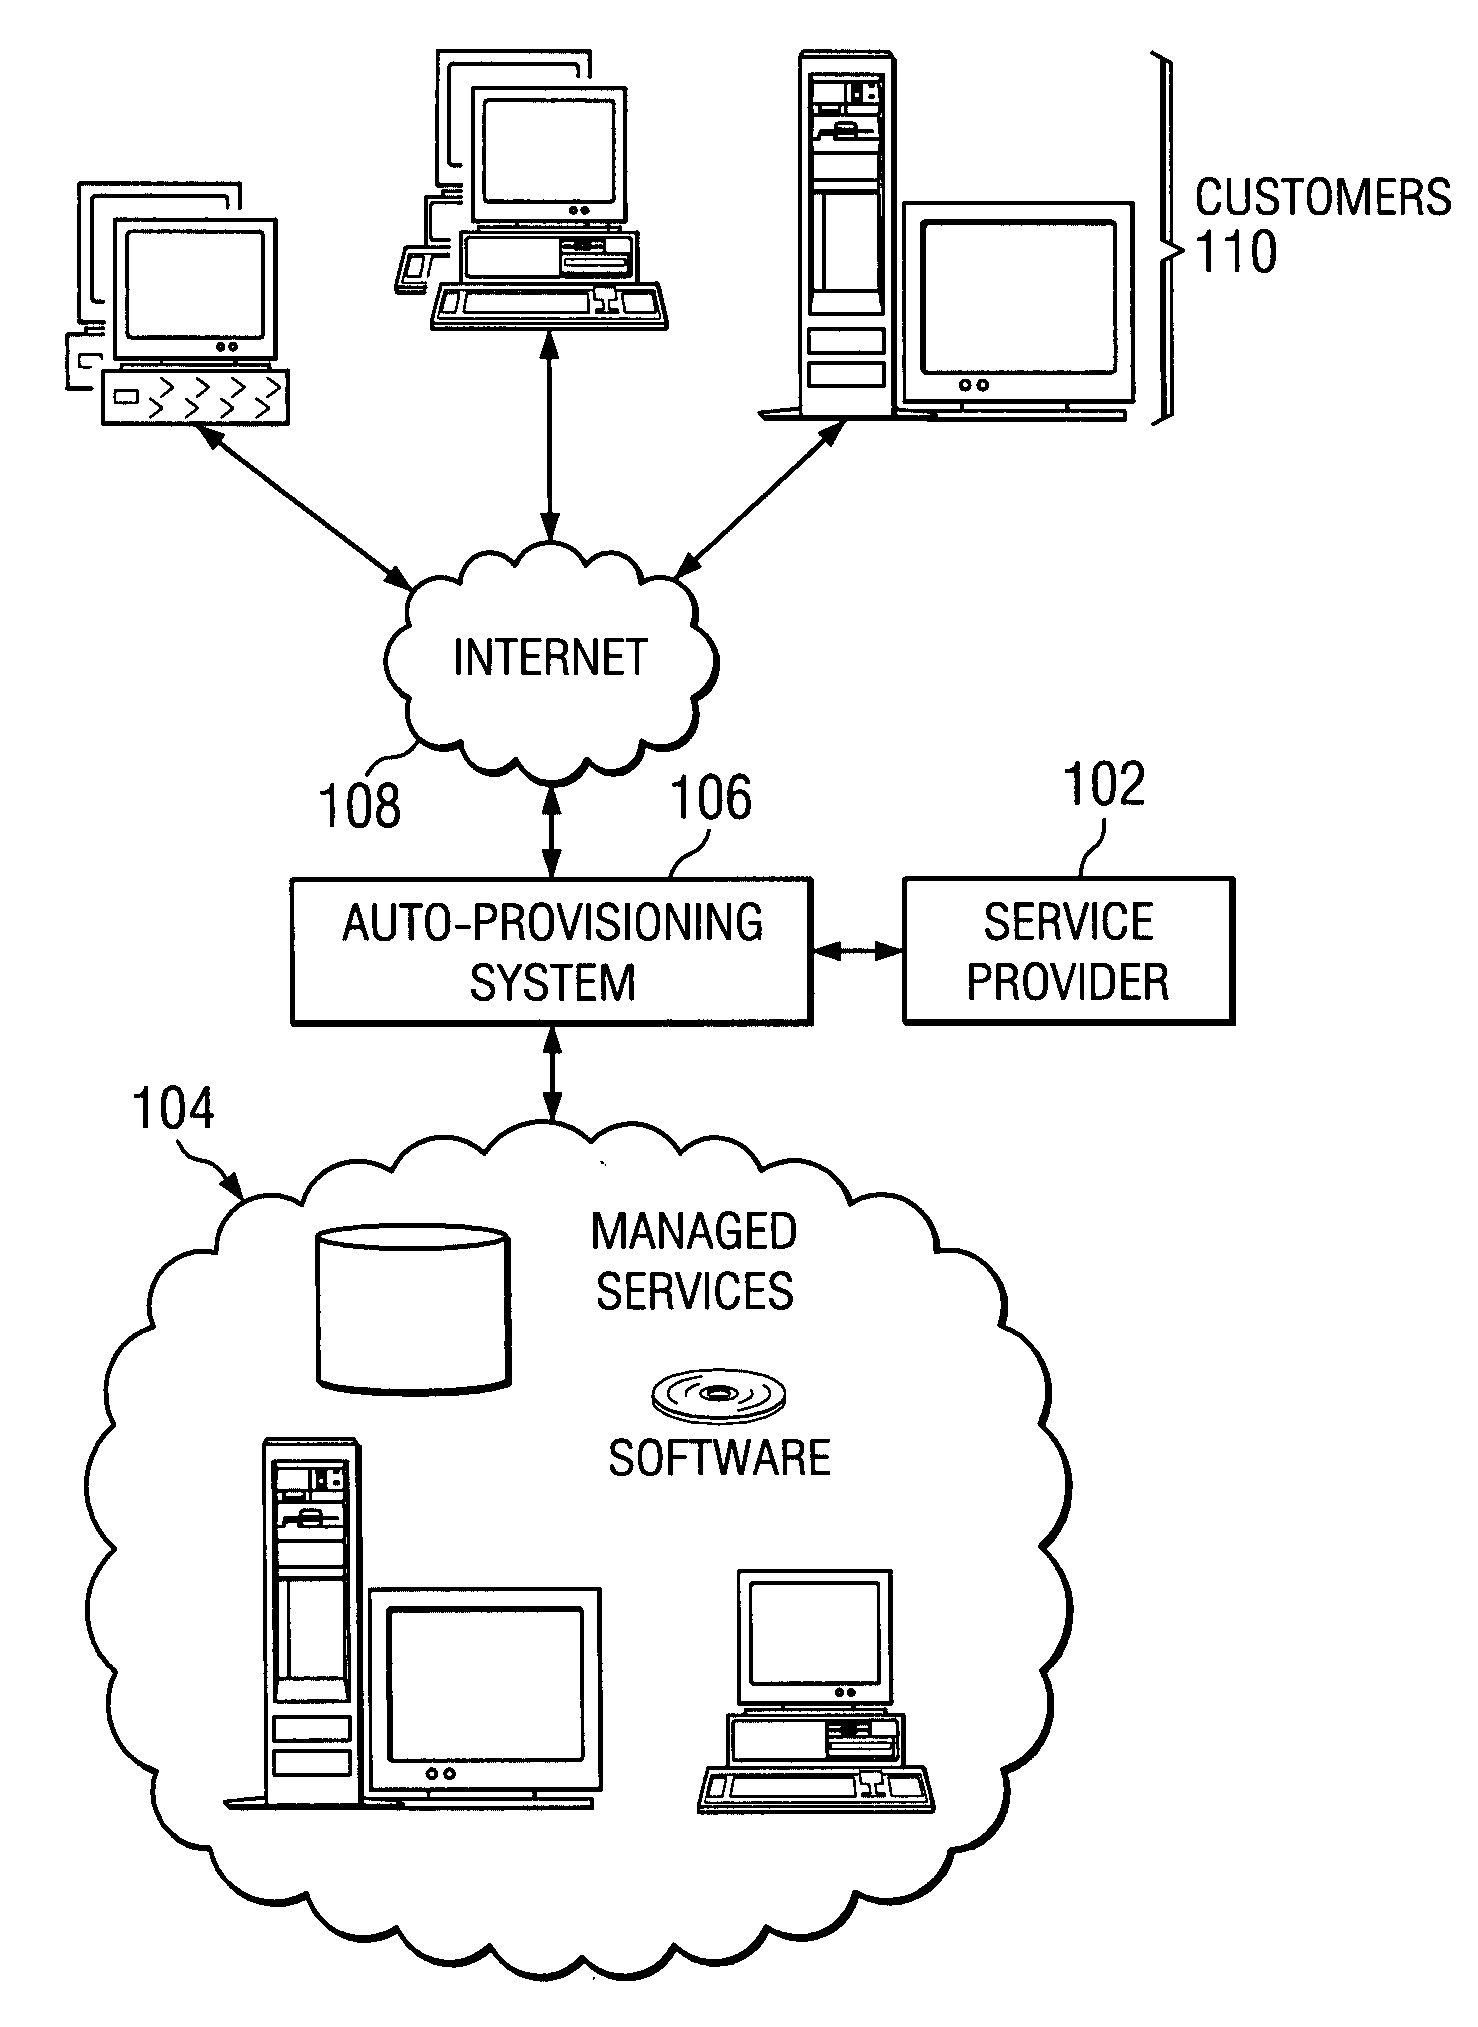 Generic method for defining resource configuration profiles in provisioning systems